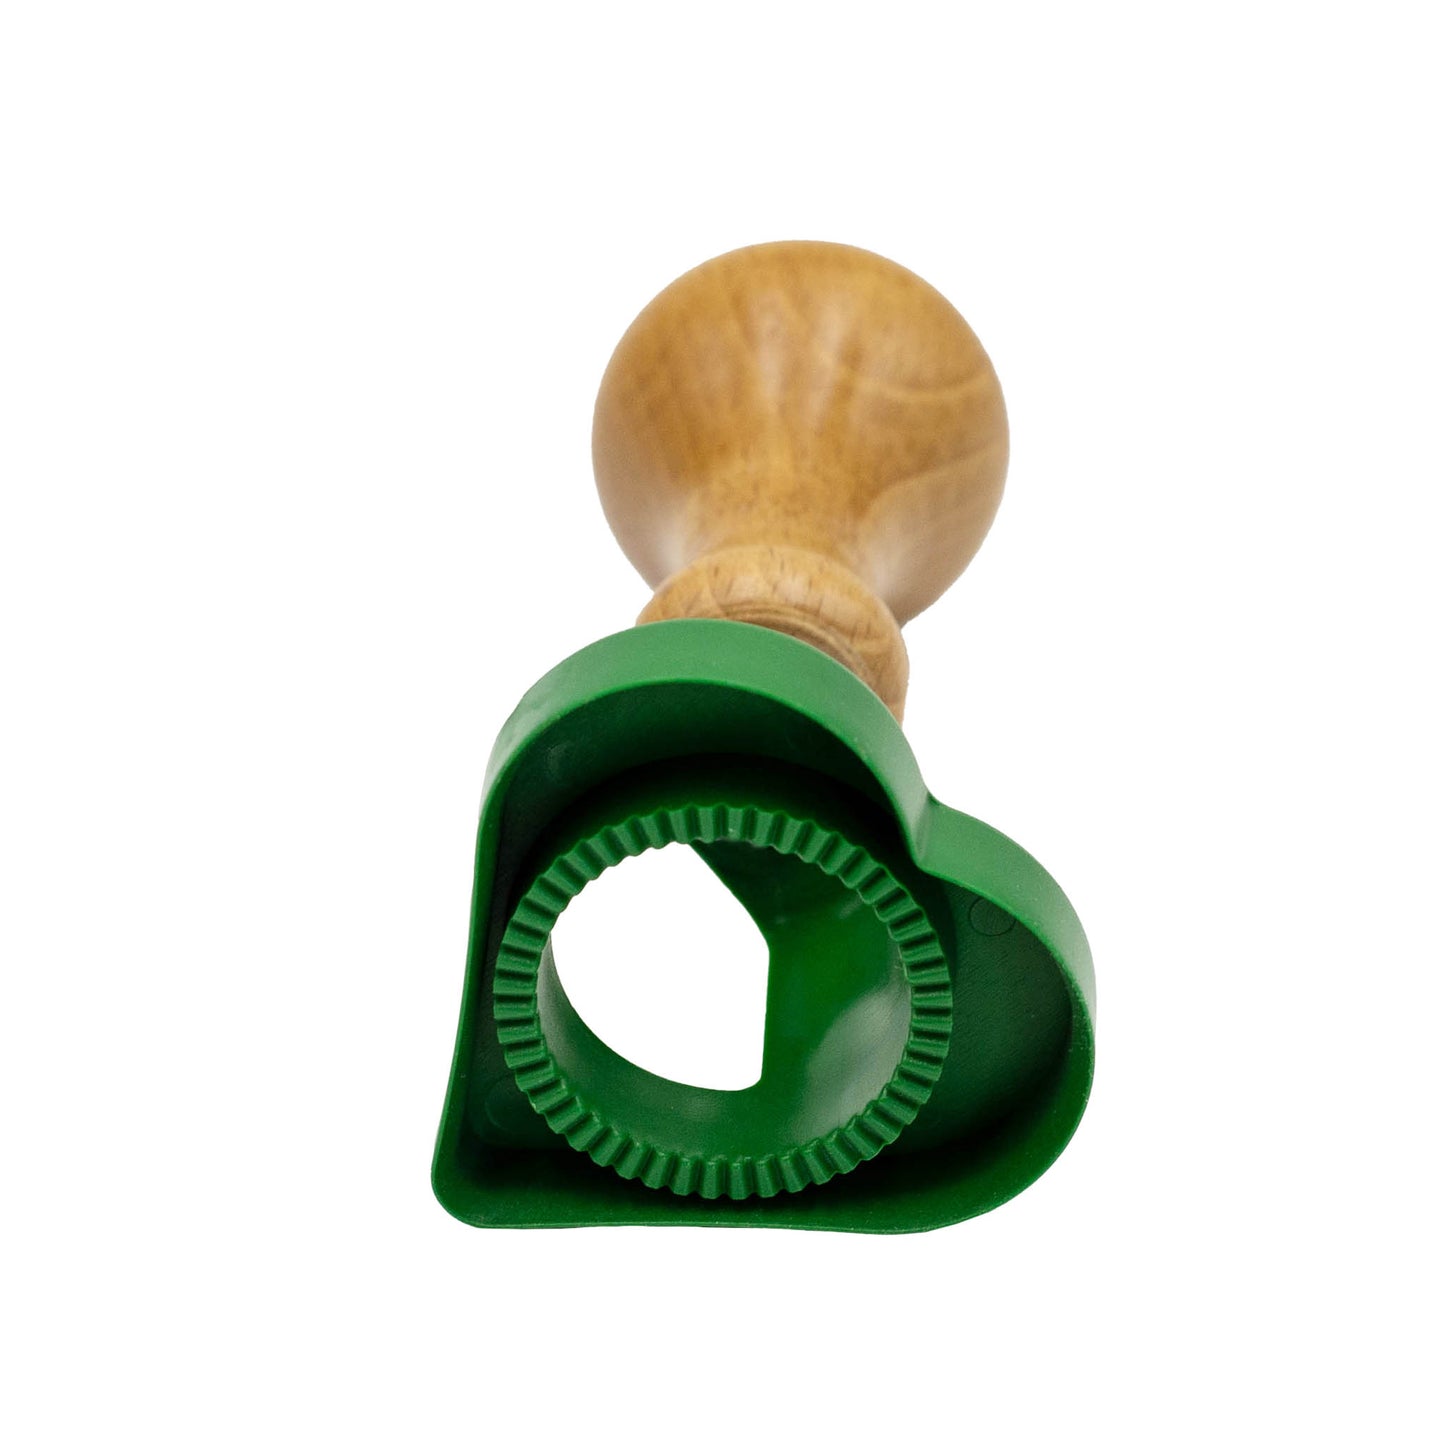 Green plastic heart shape biscuit and pasta cutter with wooden handle. 